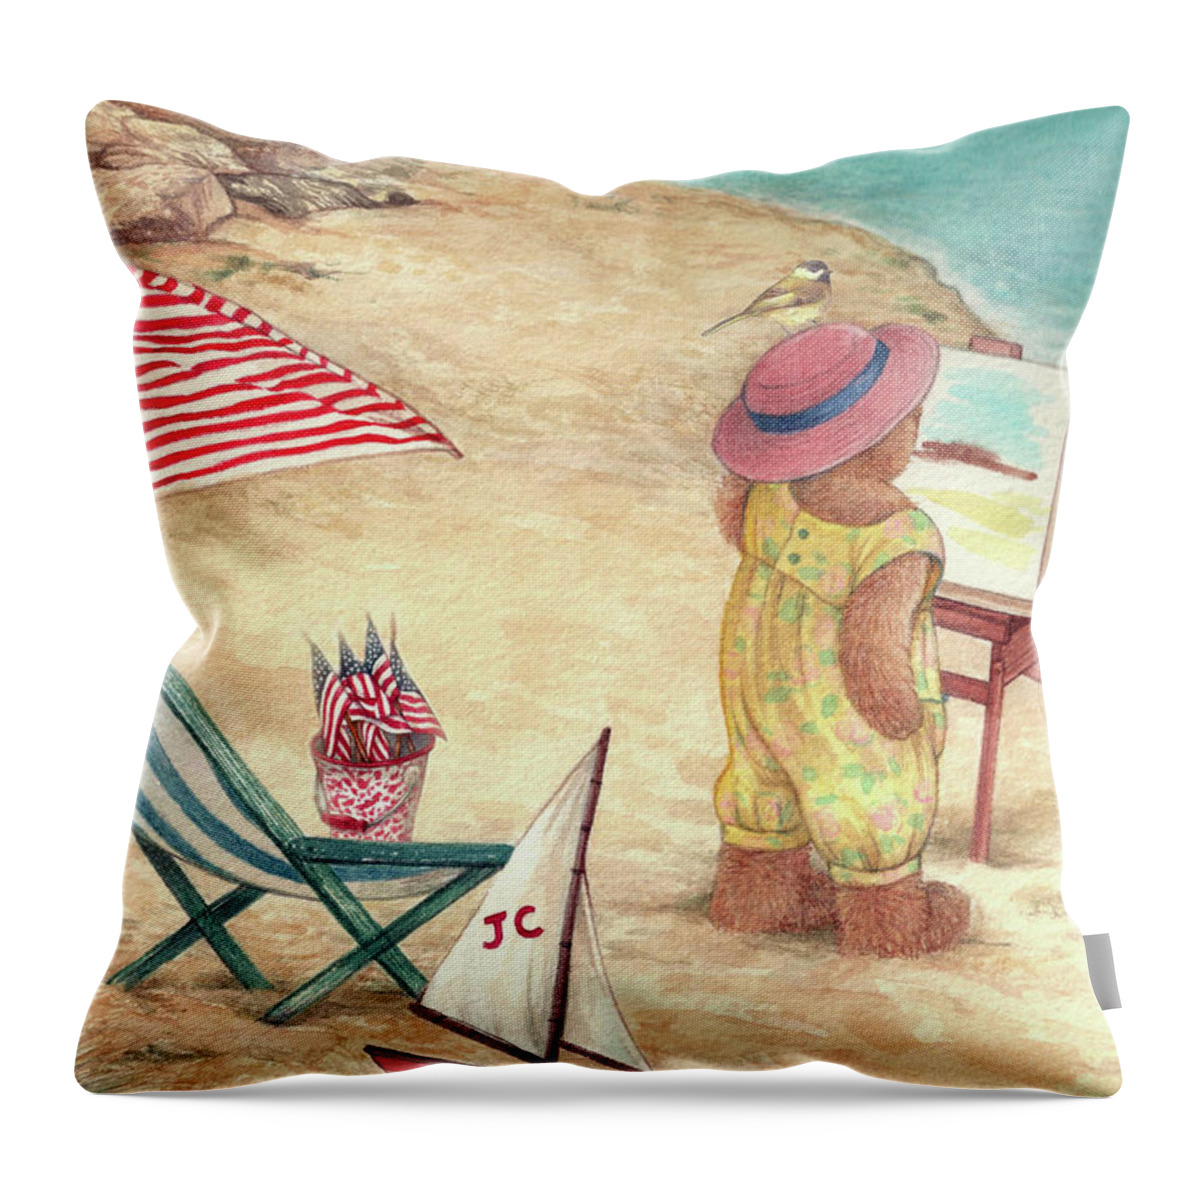 Illustrated Teddy Bear Throw Pillow featuring the painting Whimsical Bear on the Beach by Judith Cheng